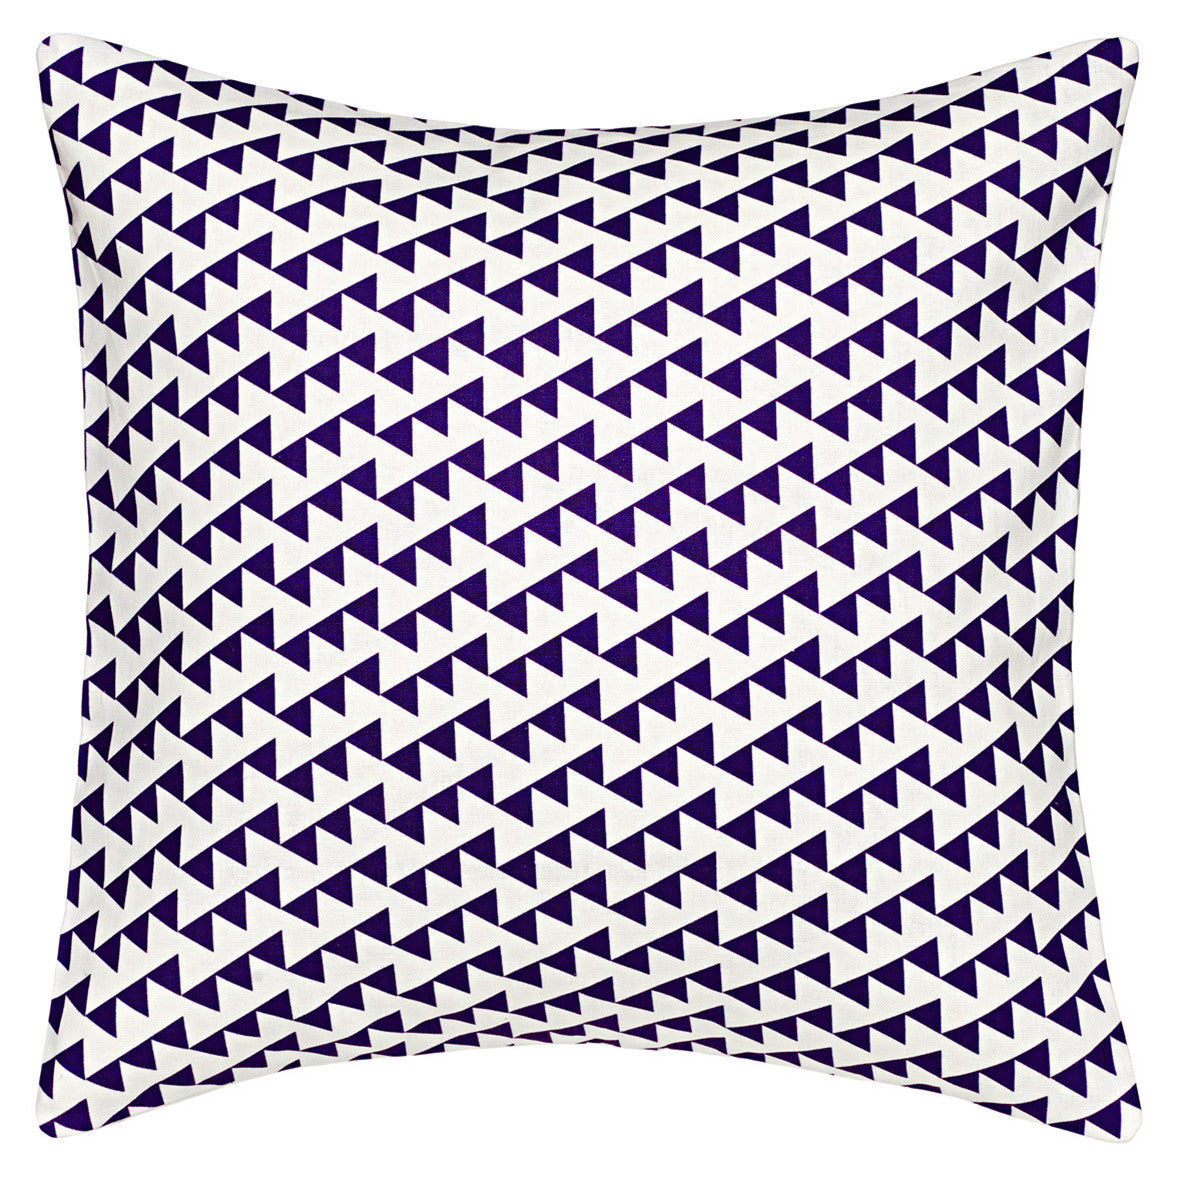 Bunting Geometric Pattern Linen Cotton Cushion in Dark Aubergine Purple 45x45cm (18x18") Throw Pillow Ships from Canada worldwide including the USA